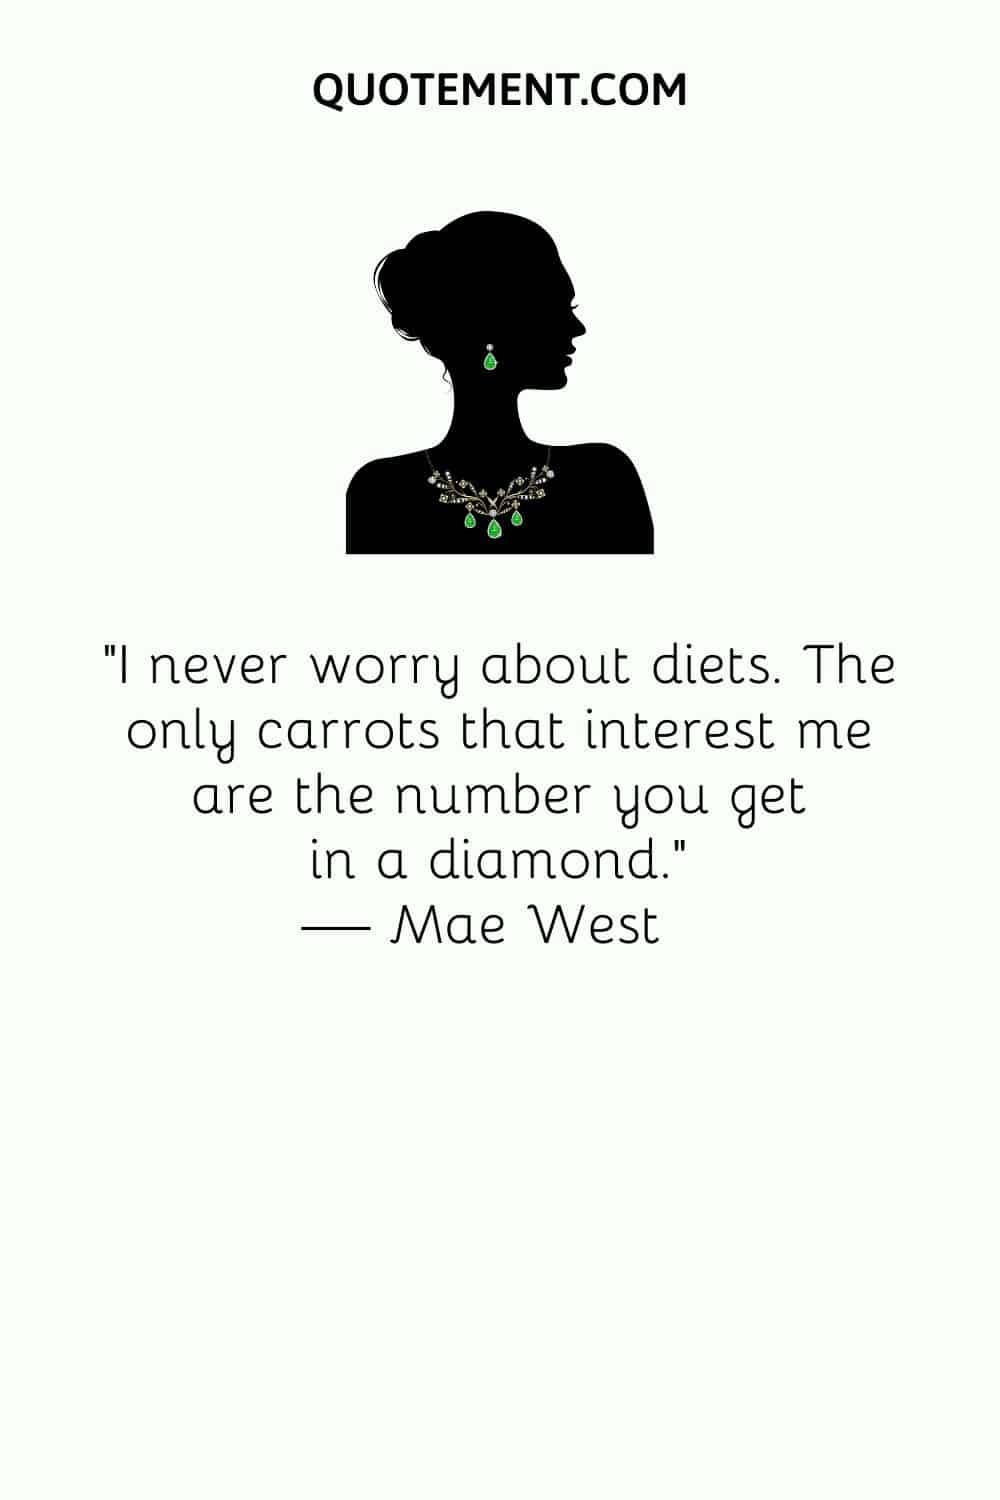 I never worry about diets. The only carrots that interest me are the number you get in a diamond